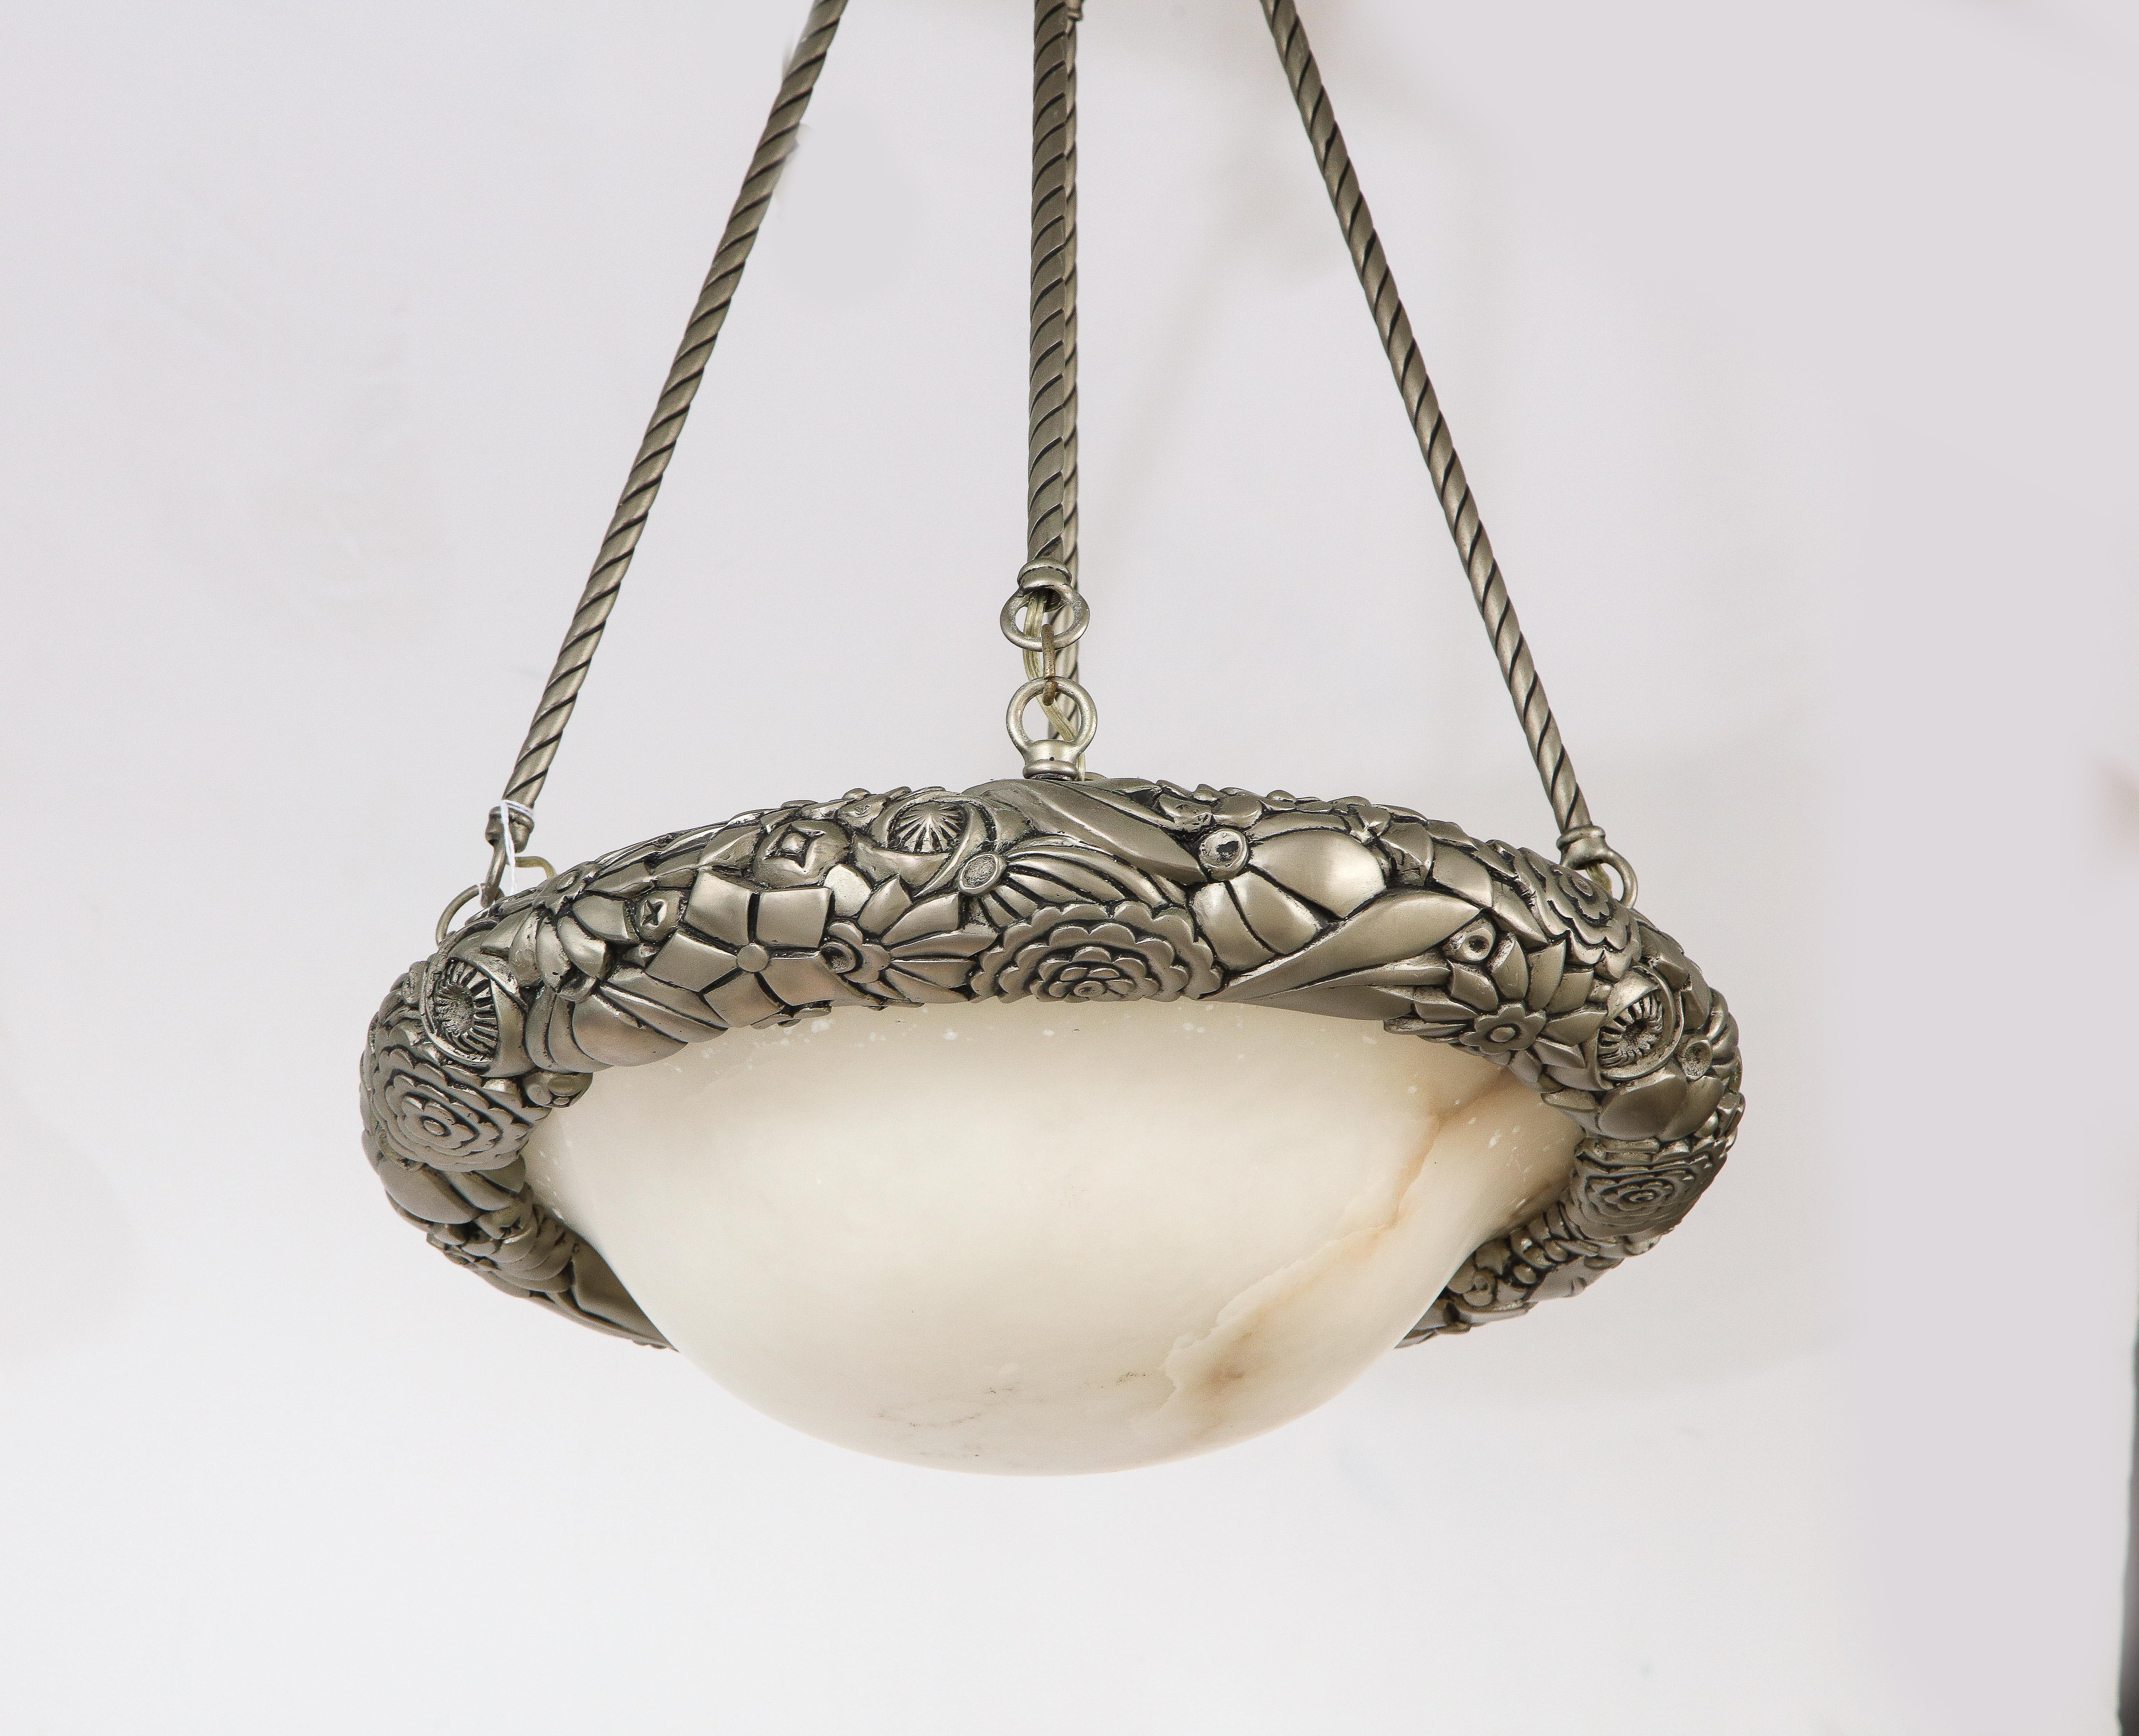 A wonderful French Art Deco pendant chandelier, the alabaster dome shade with silvered metal surround cast with floral motifs, supported by four rope motif rods with smooth canopy, in the manner of Sabino. Measures: 22